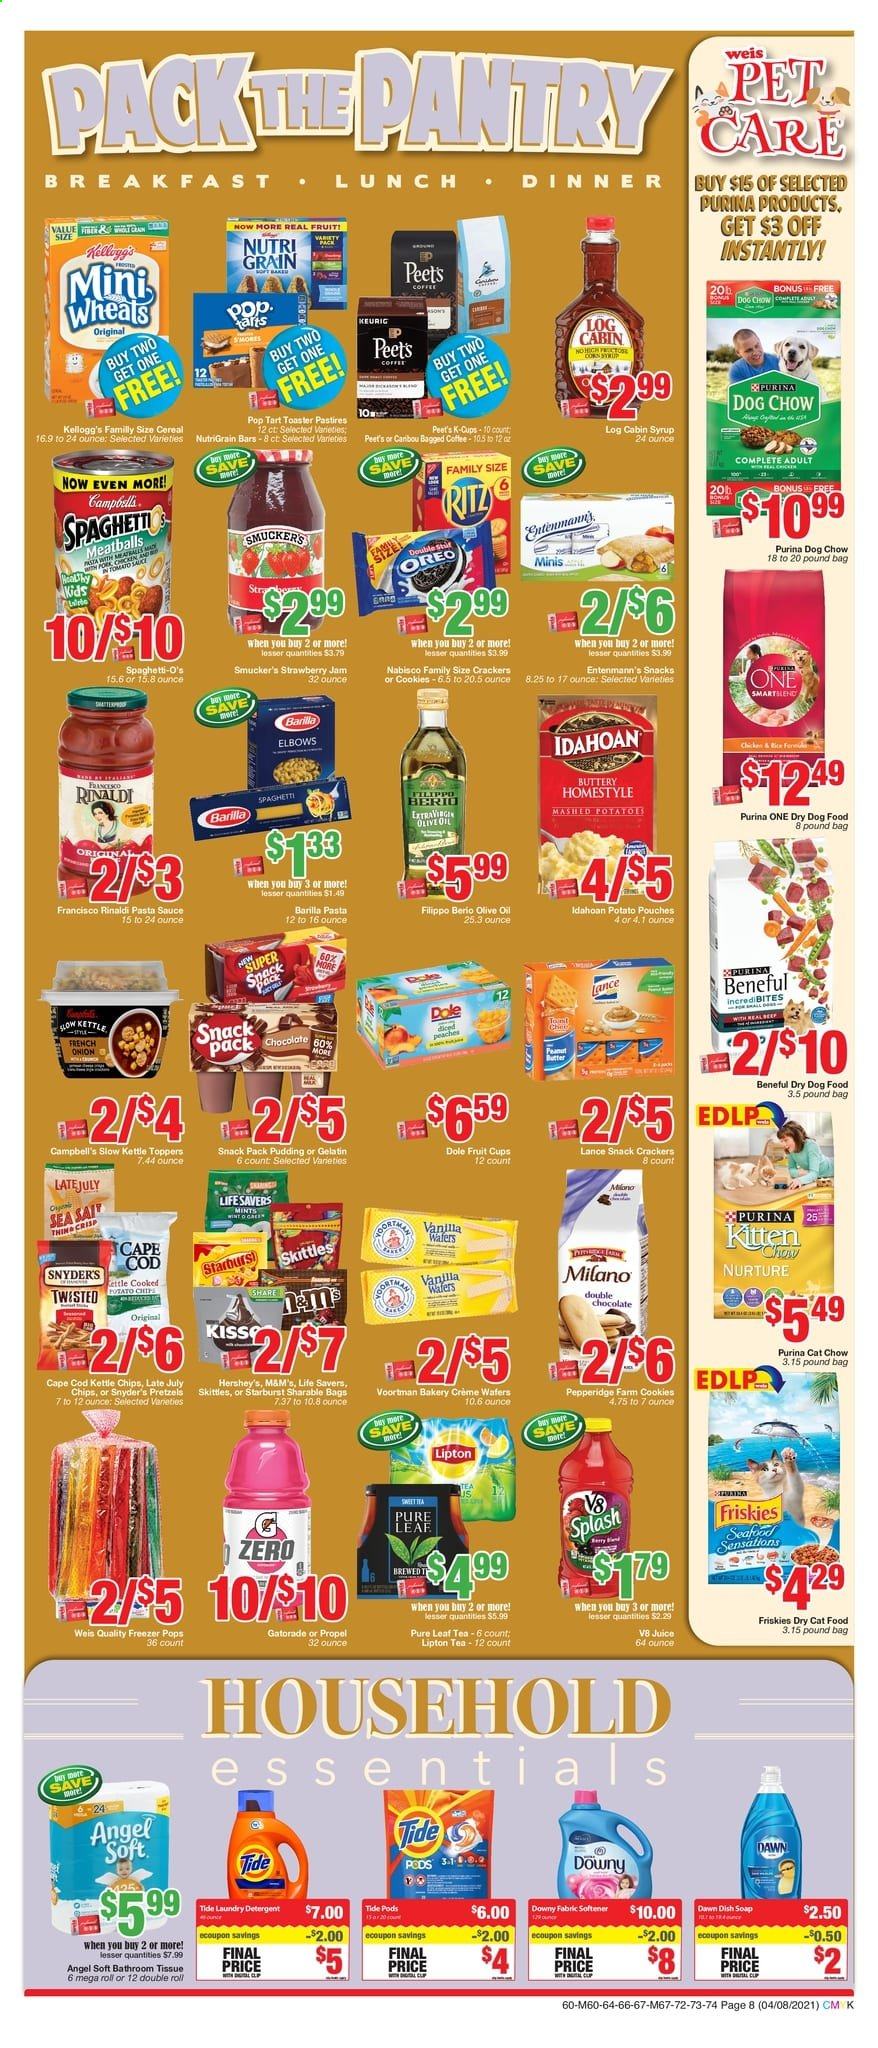 thumbnail - Weis Flyer - 04/08/2021 - 05/06/2021 - Sales products - fruit cup, pretzels, tart, Entenmann's, Dole, cod, Campbell's, spaghetti, pasta sauce, sauce, Barilla, pudding, Oreo, Hershey's, cookies, wafers, chocolate, crackers, Kellogg's, Skittles, Starburst, RITZ, chips, strawberry jam, Nutri-Grain, olive oil, oil, fruit jam, syrup, juice, Lipton, Gatorade, tea, Pure Leaf, bagged coffee, bath tissue, detergent, Tide, fabric softener, laundry detergent, Downy Laundry, soap, animal food, cat food, dog food, Dog Chow, Purina, dry dog food, dry cat food, Friskies, gelatin. Page 8.